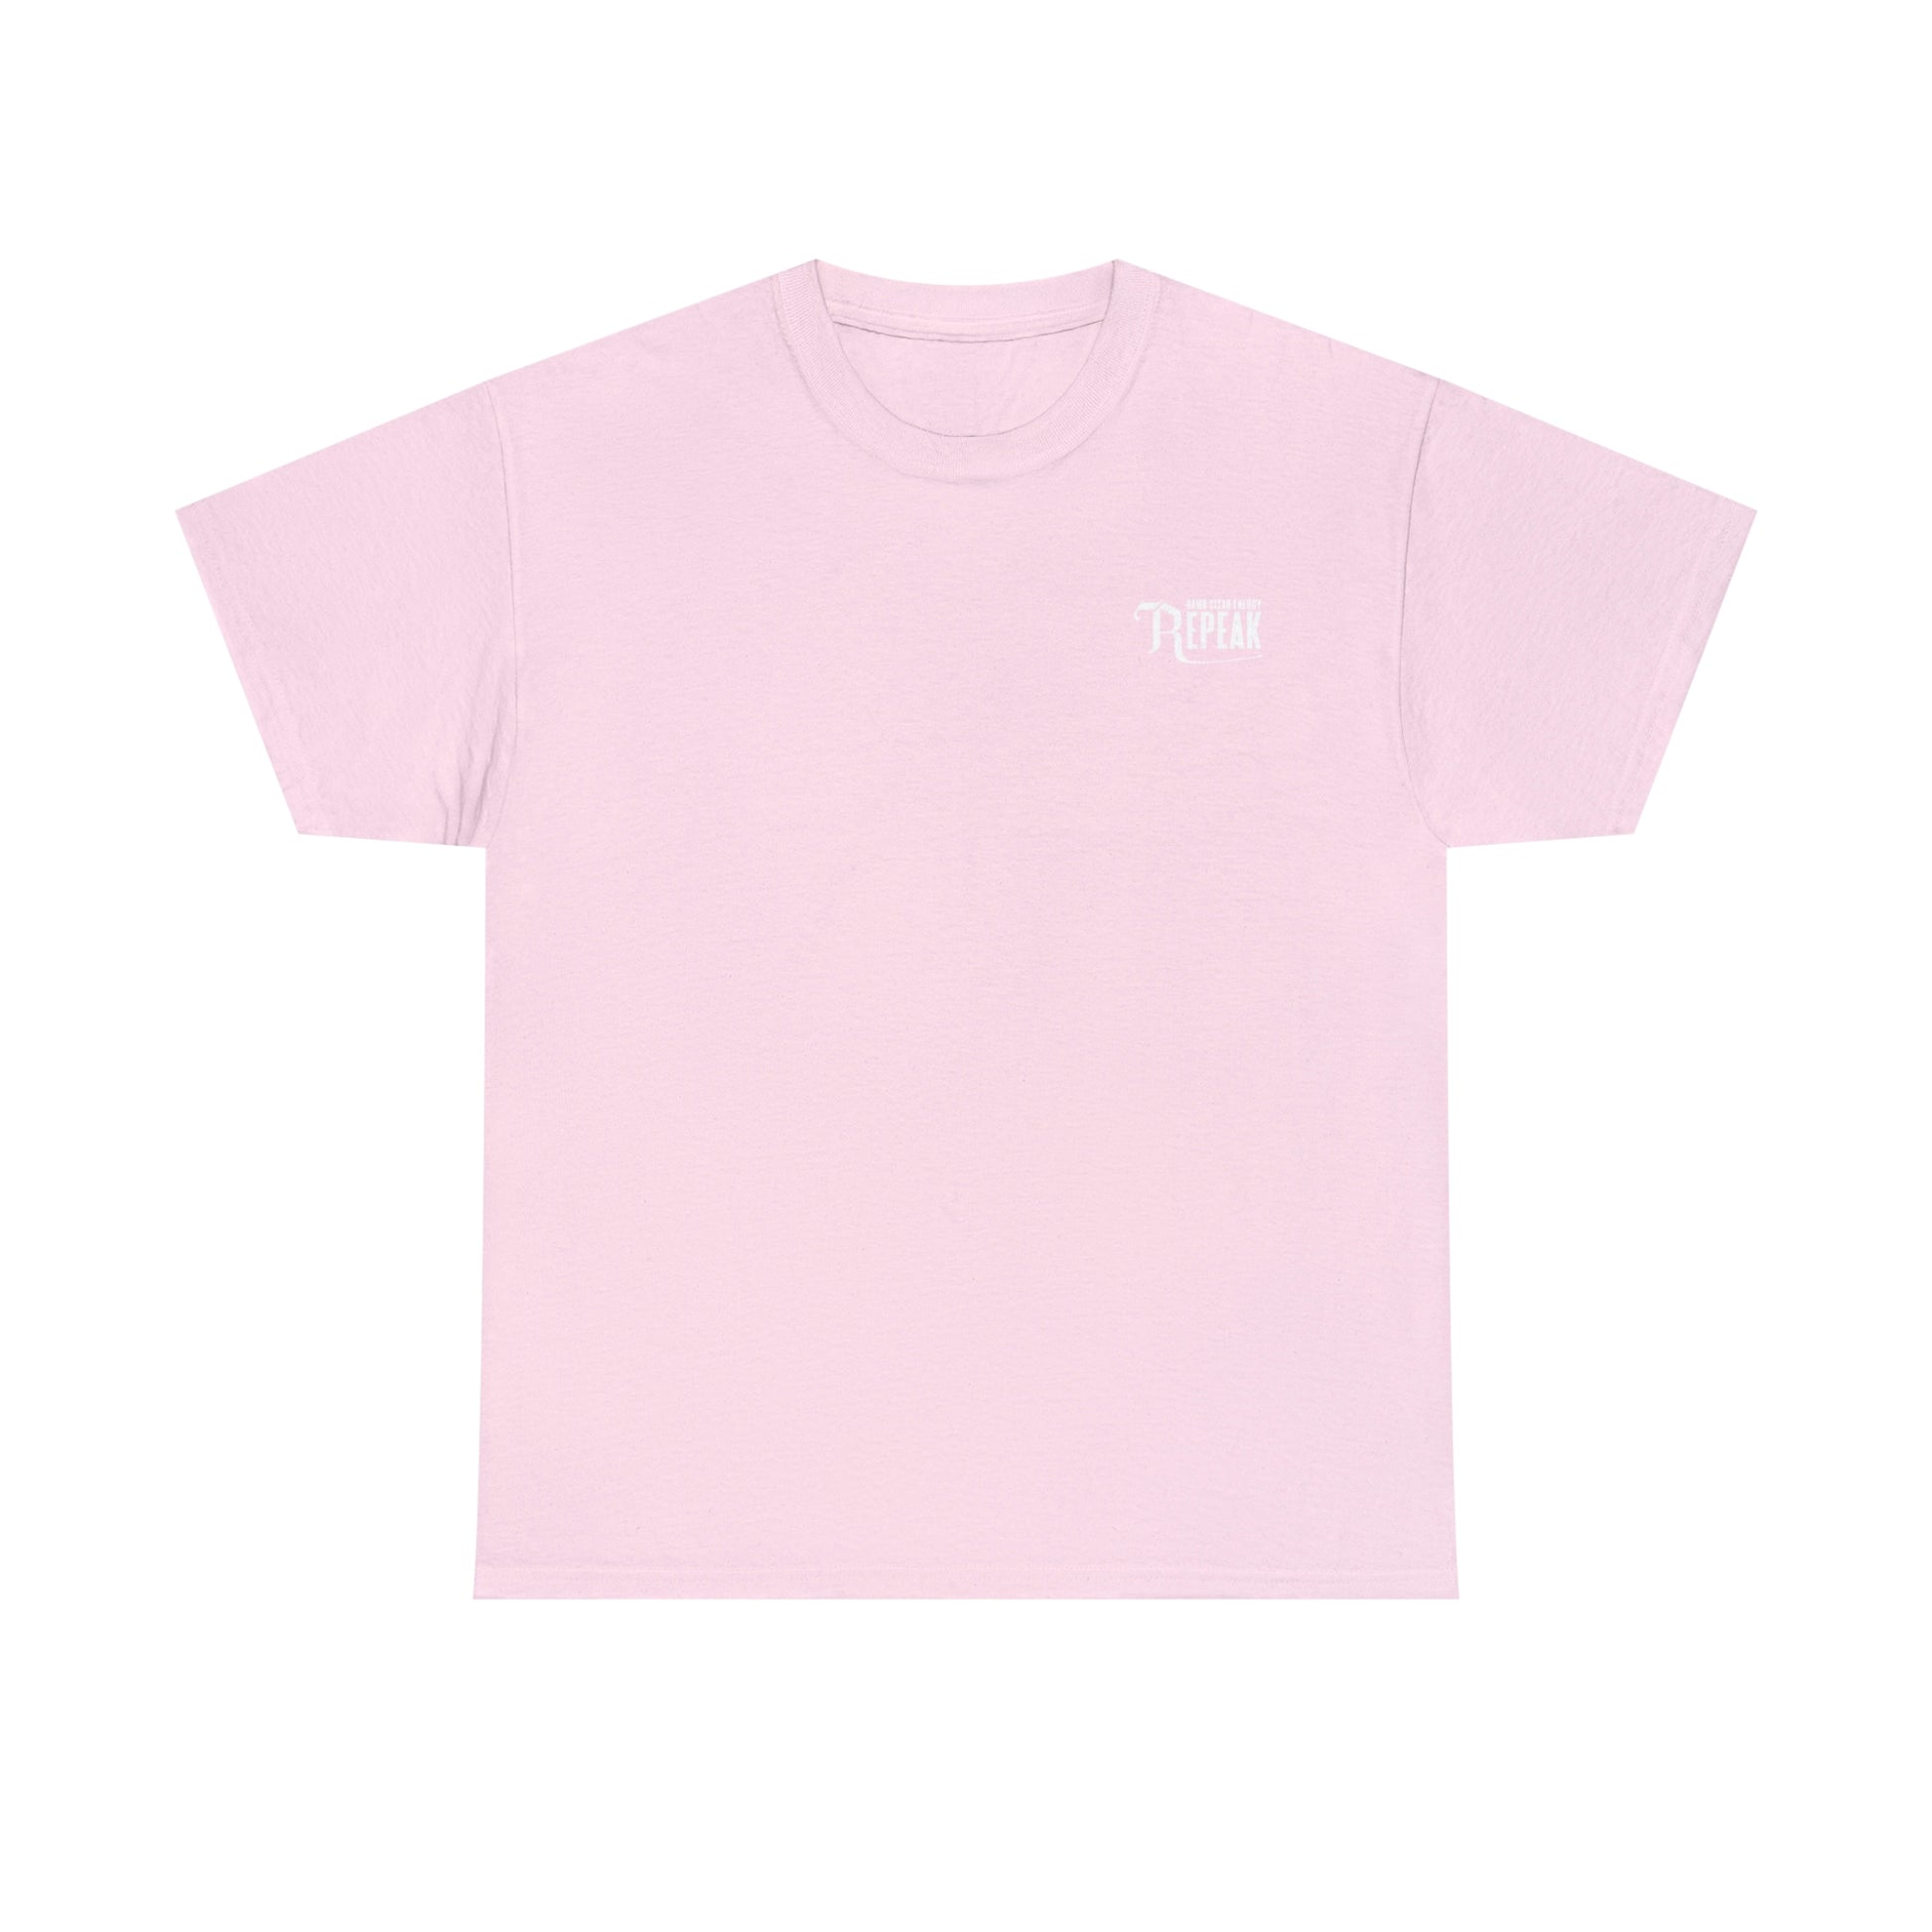 repeak energy drink pink t-shirt, front side